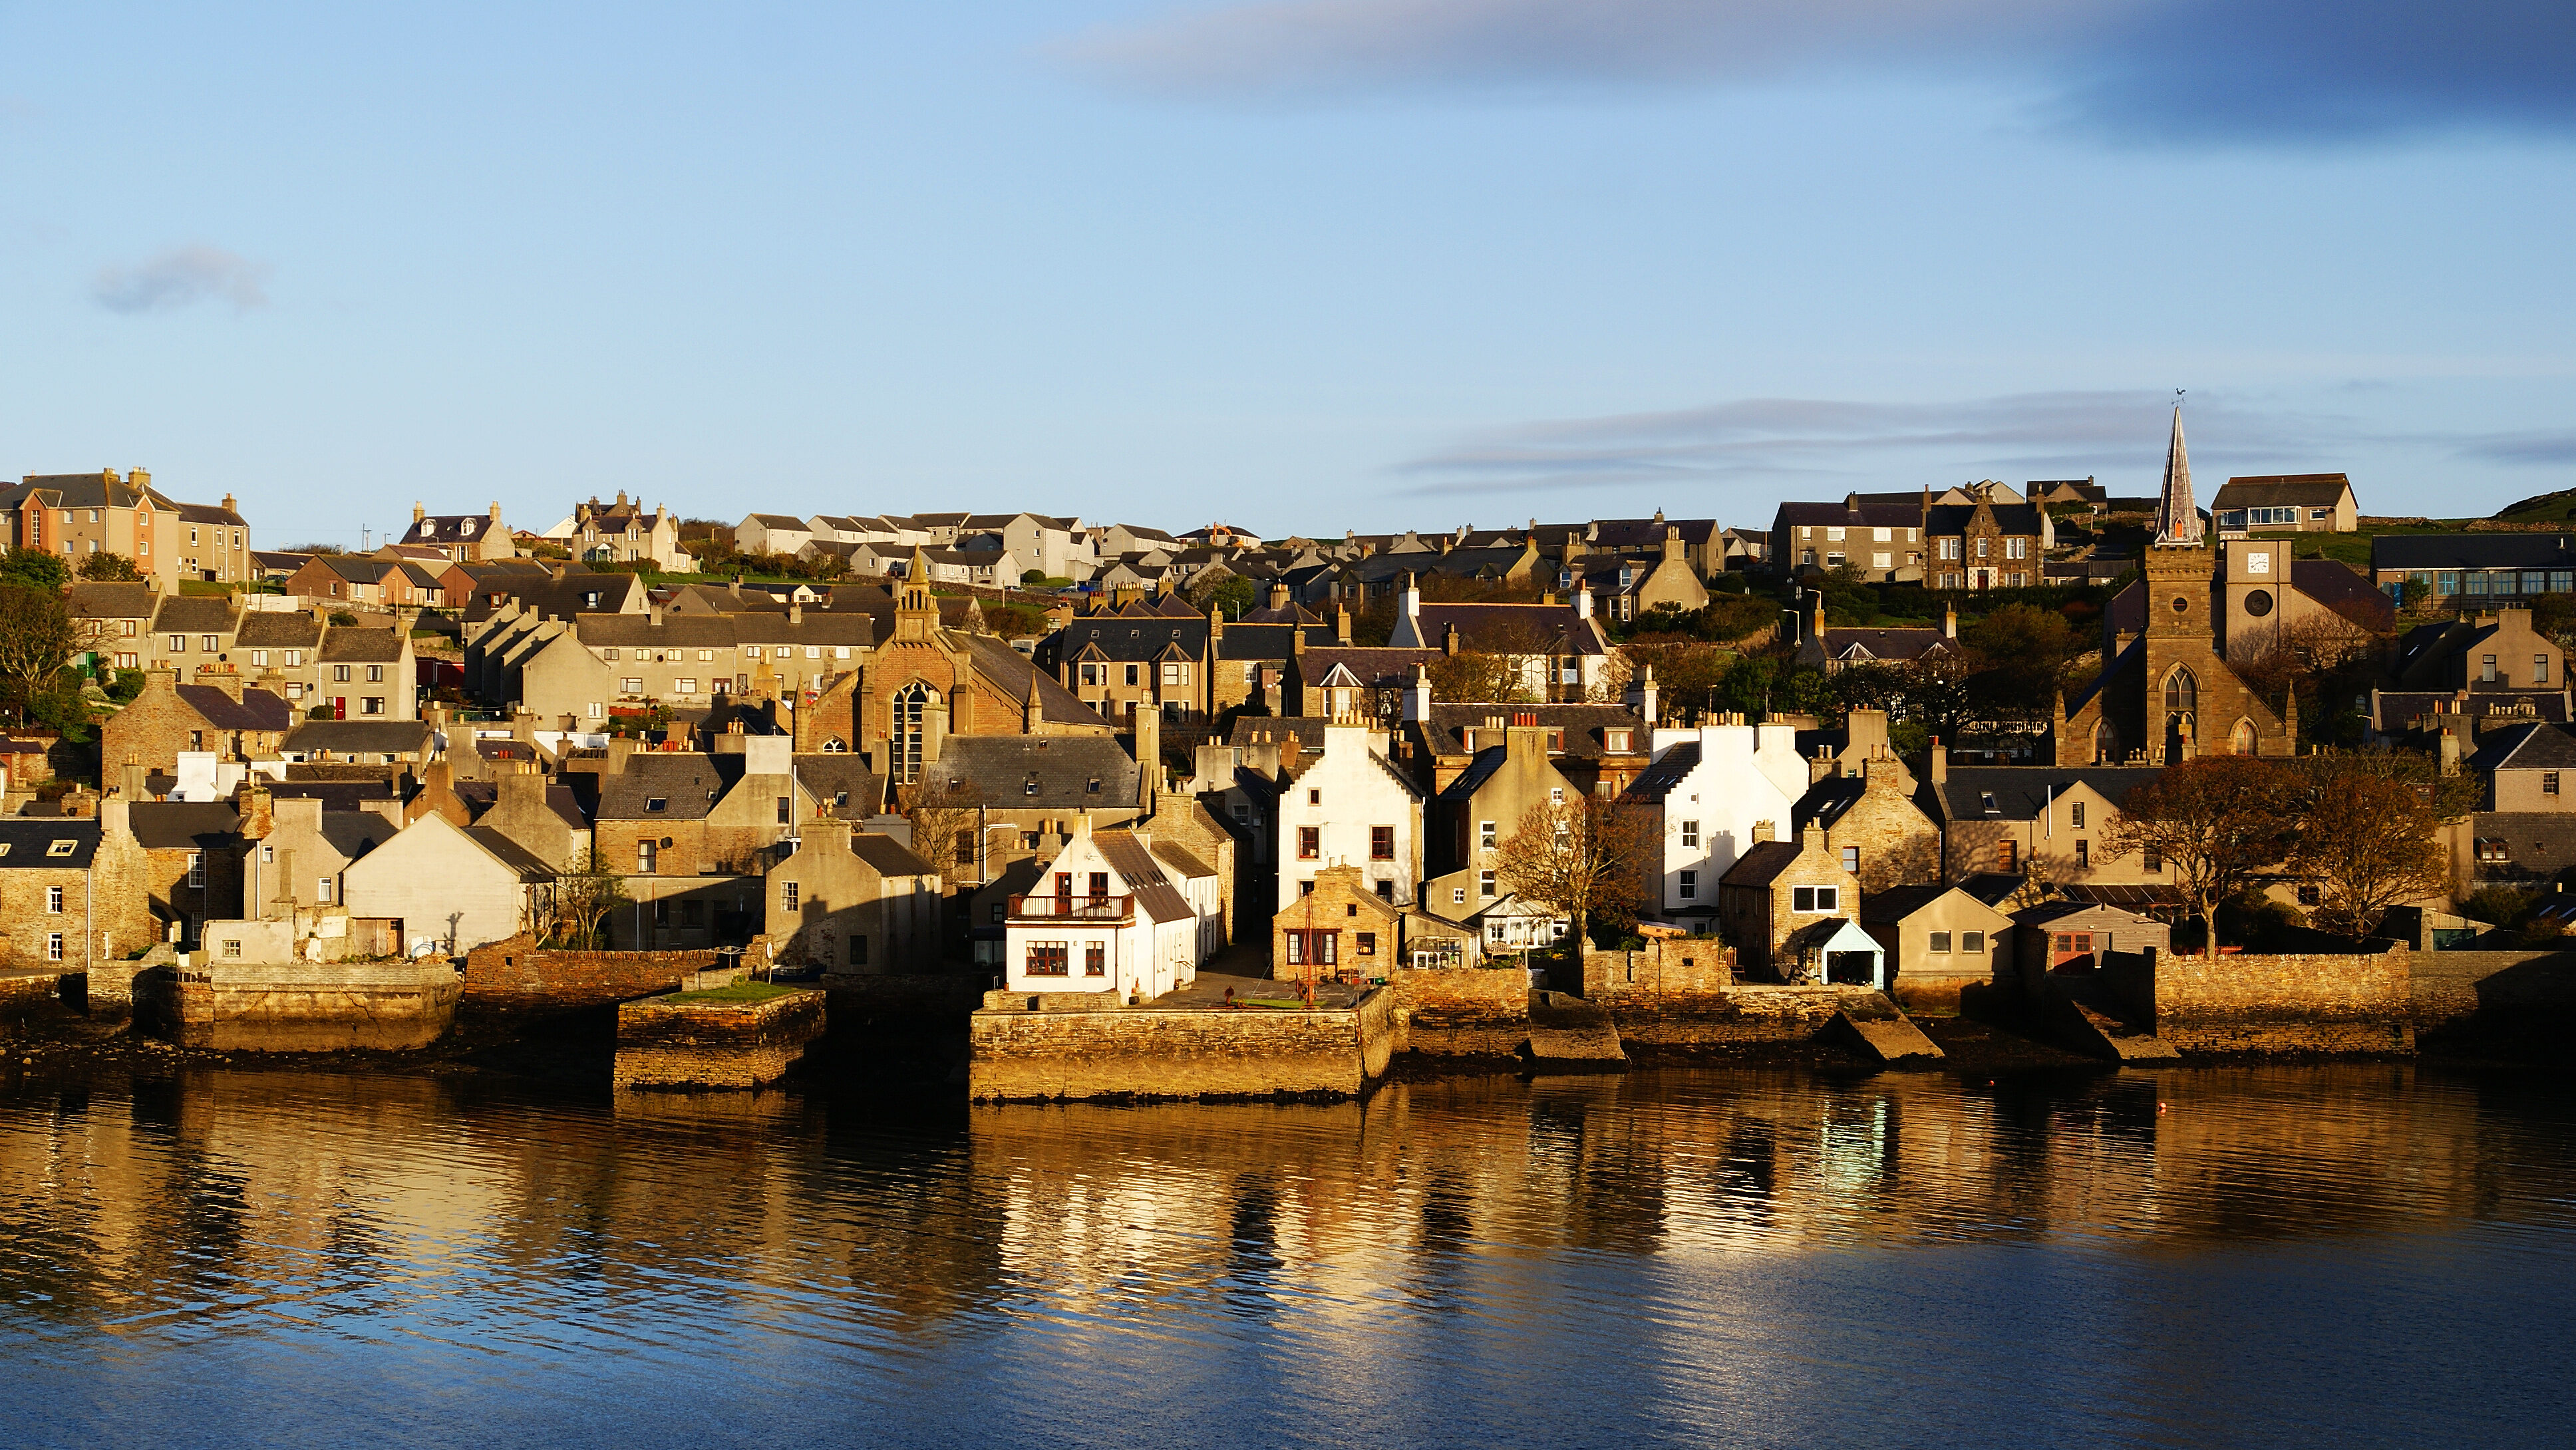 Stromness across the water